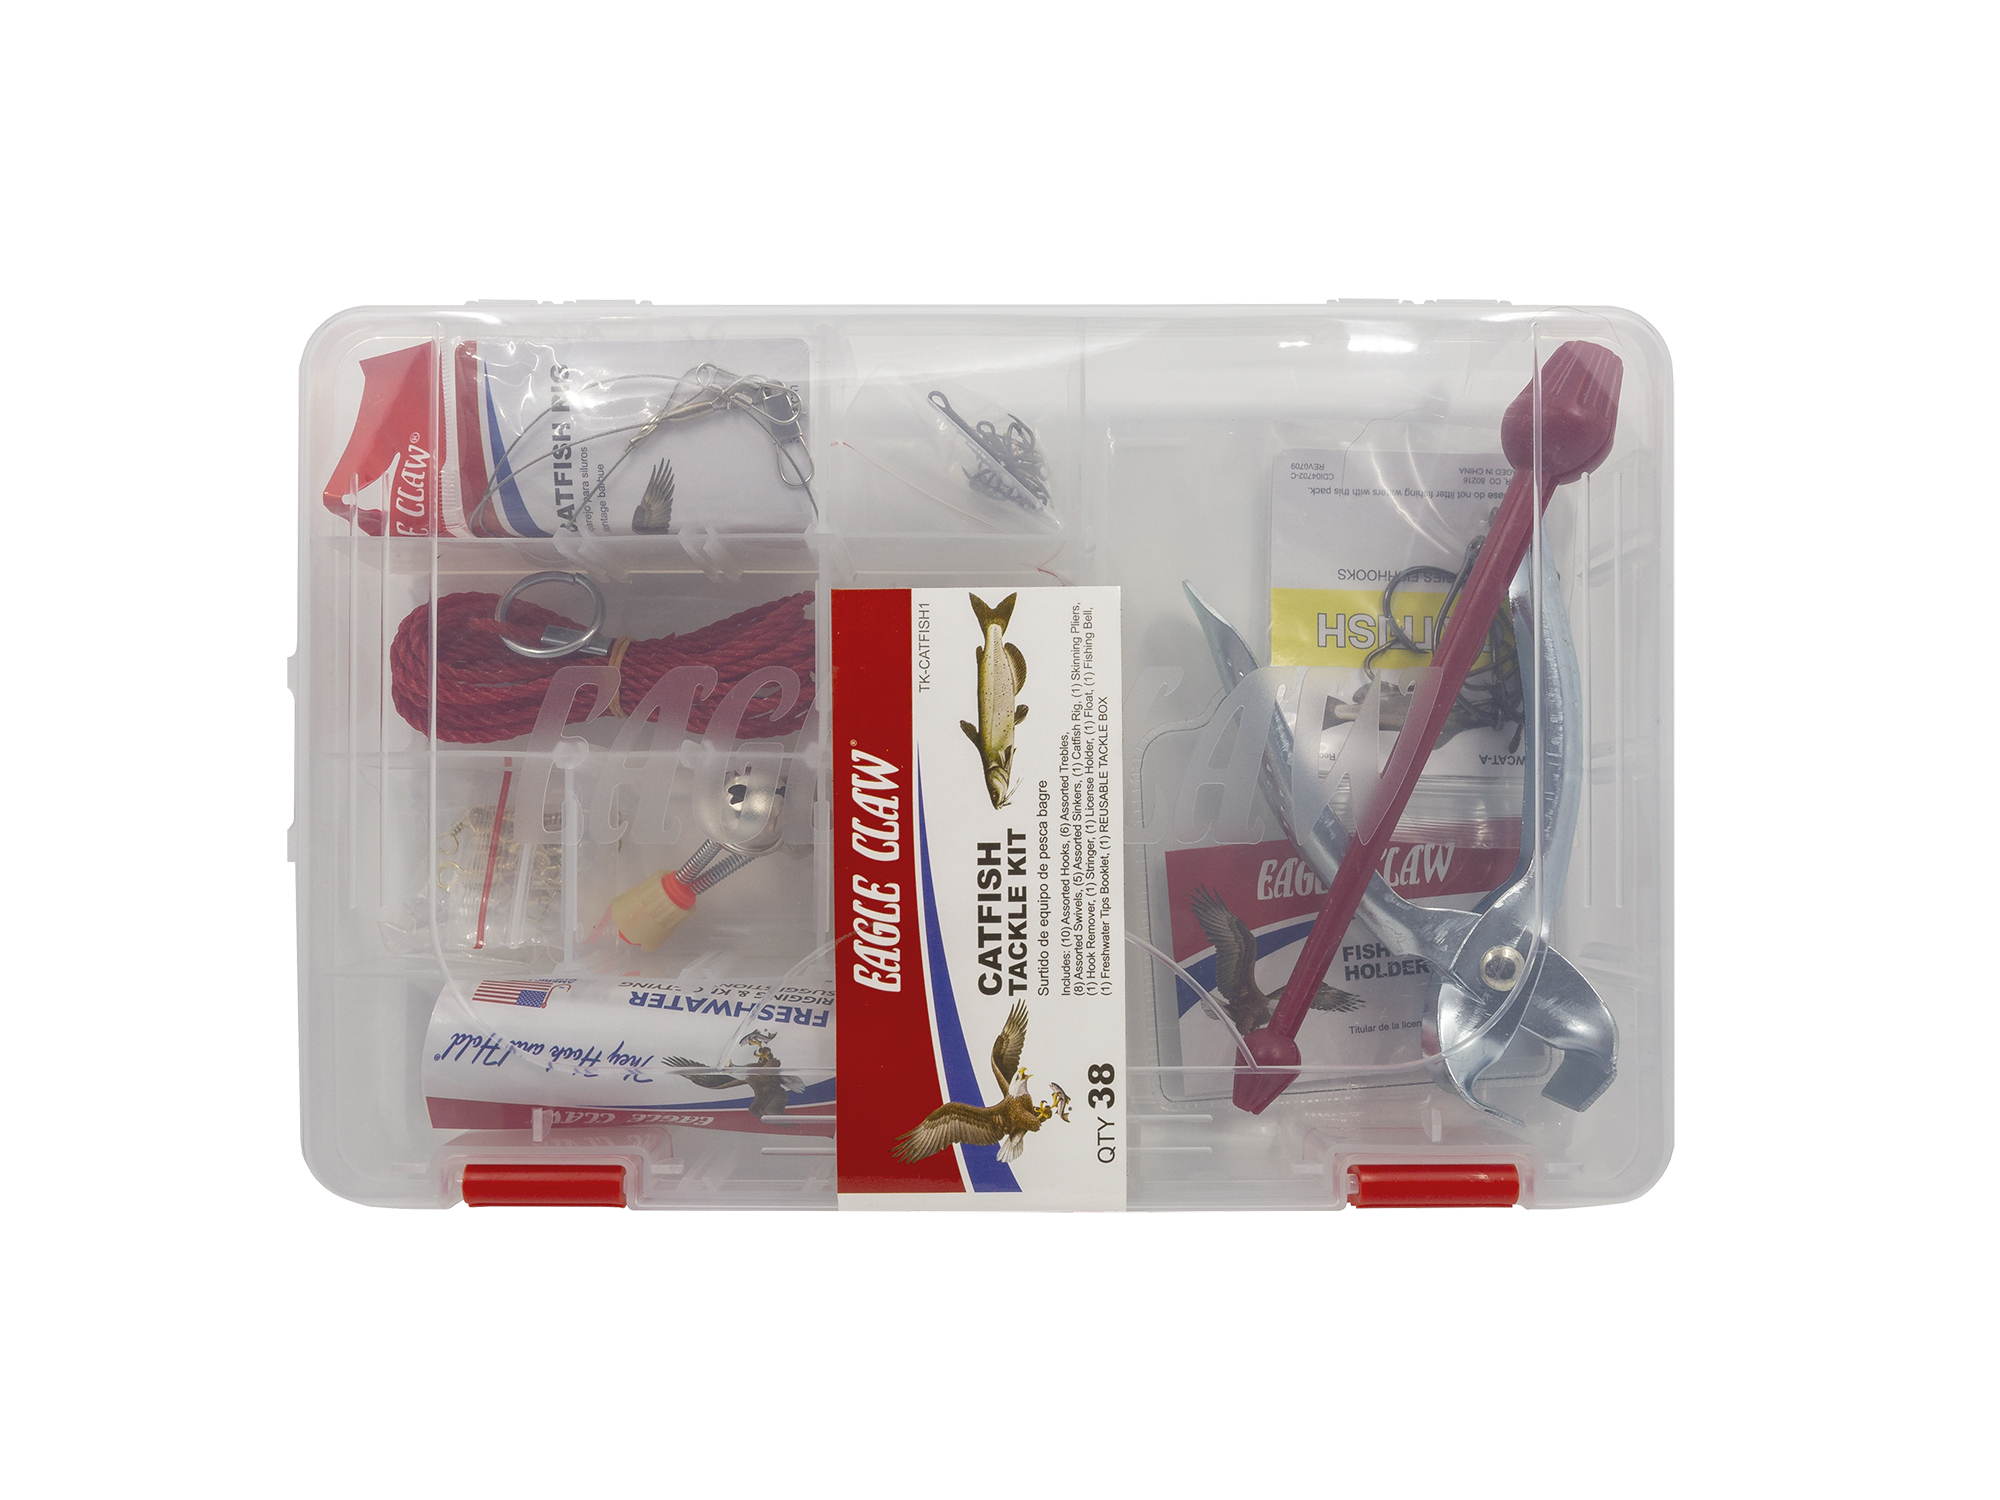 Catfish Tackle: How To Use A Working Tackle Box For Catfish 